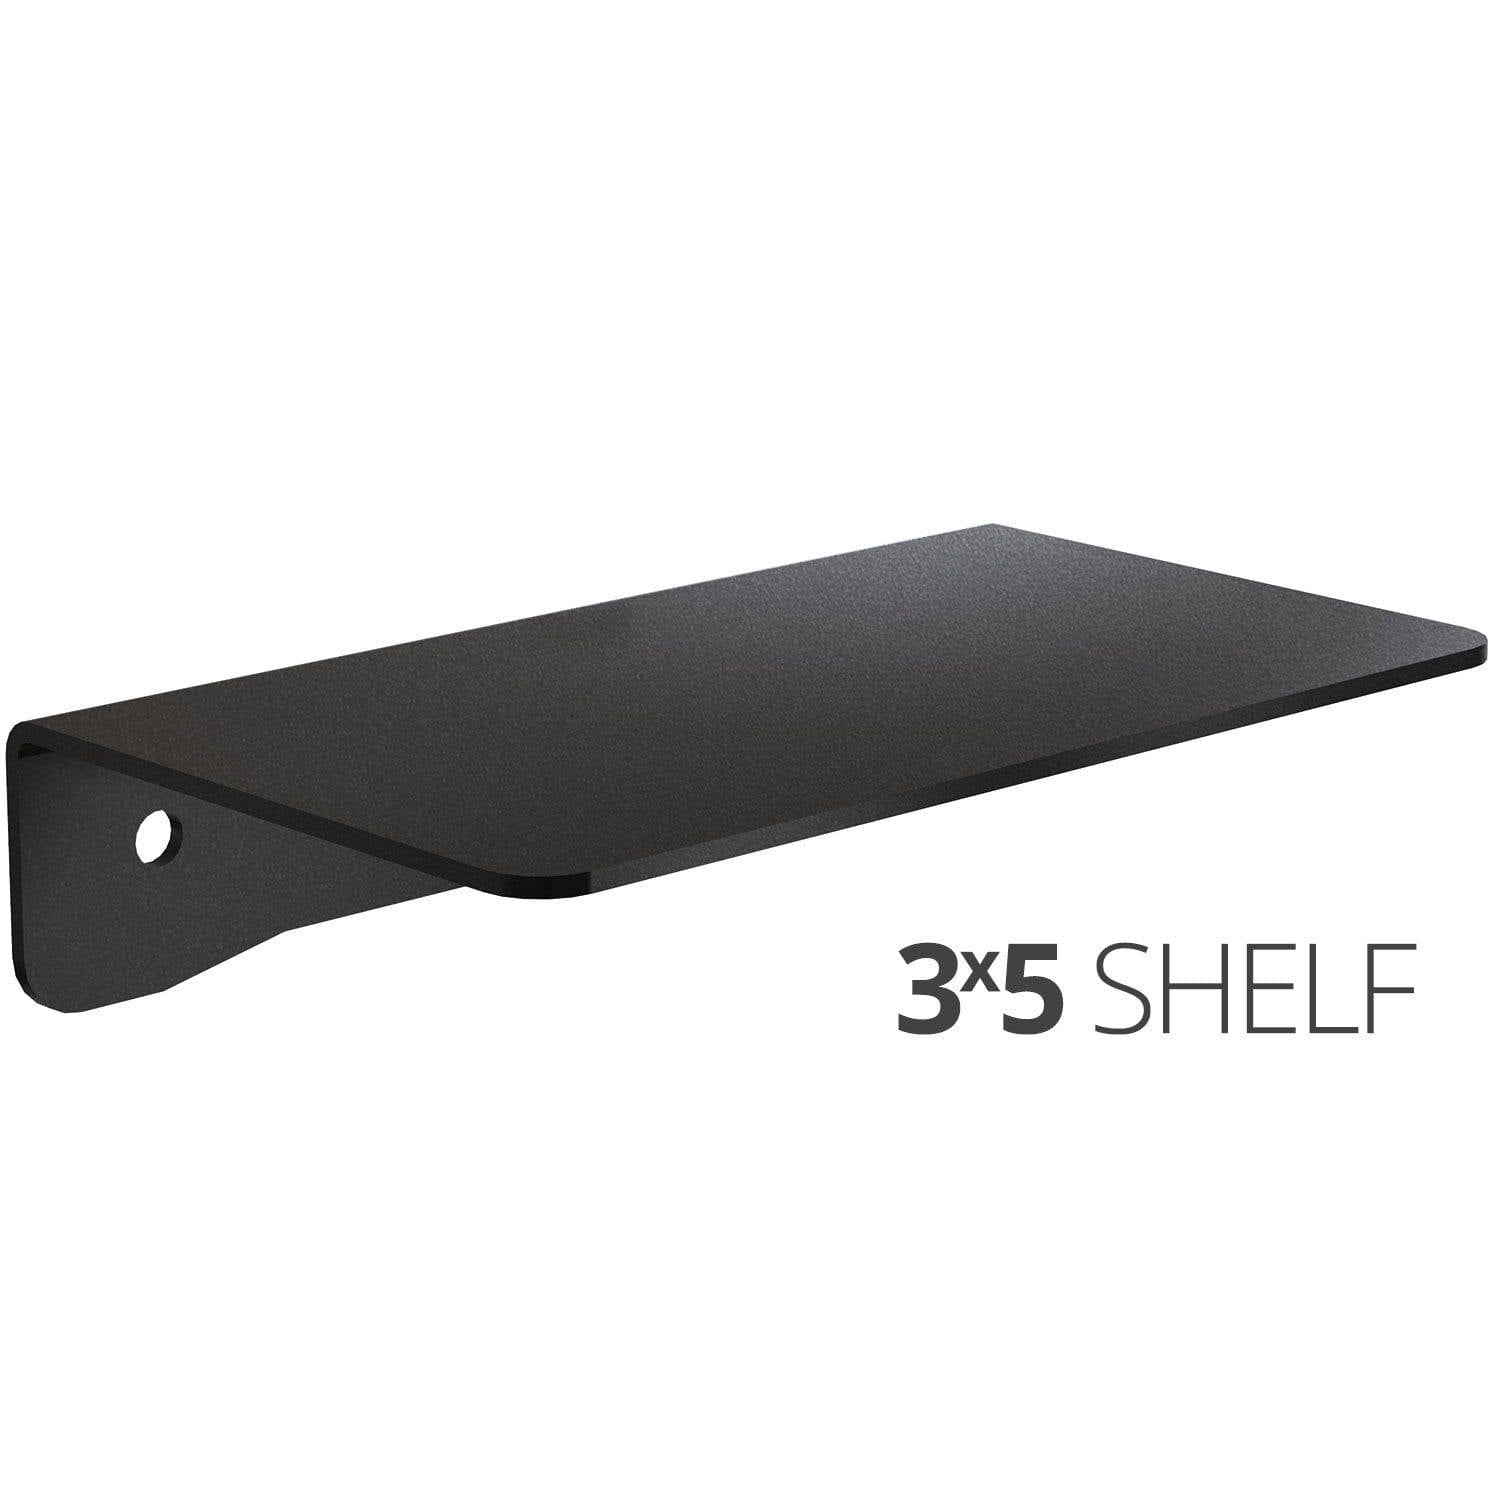 Small wall mounted shelf for home, office and garage - 3x5 angle